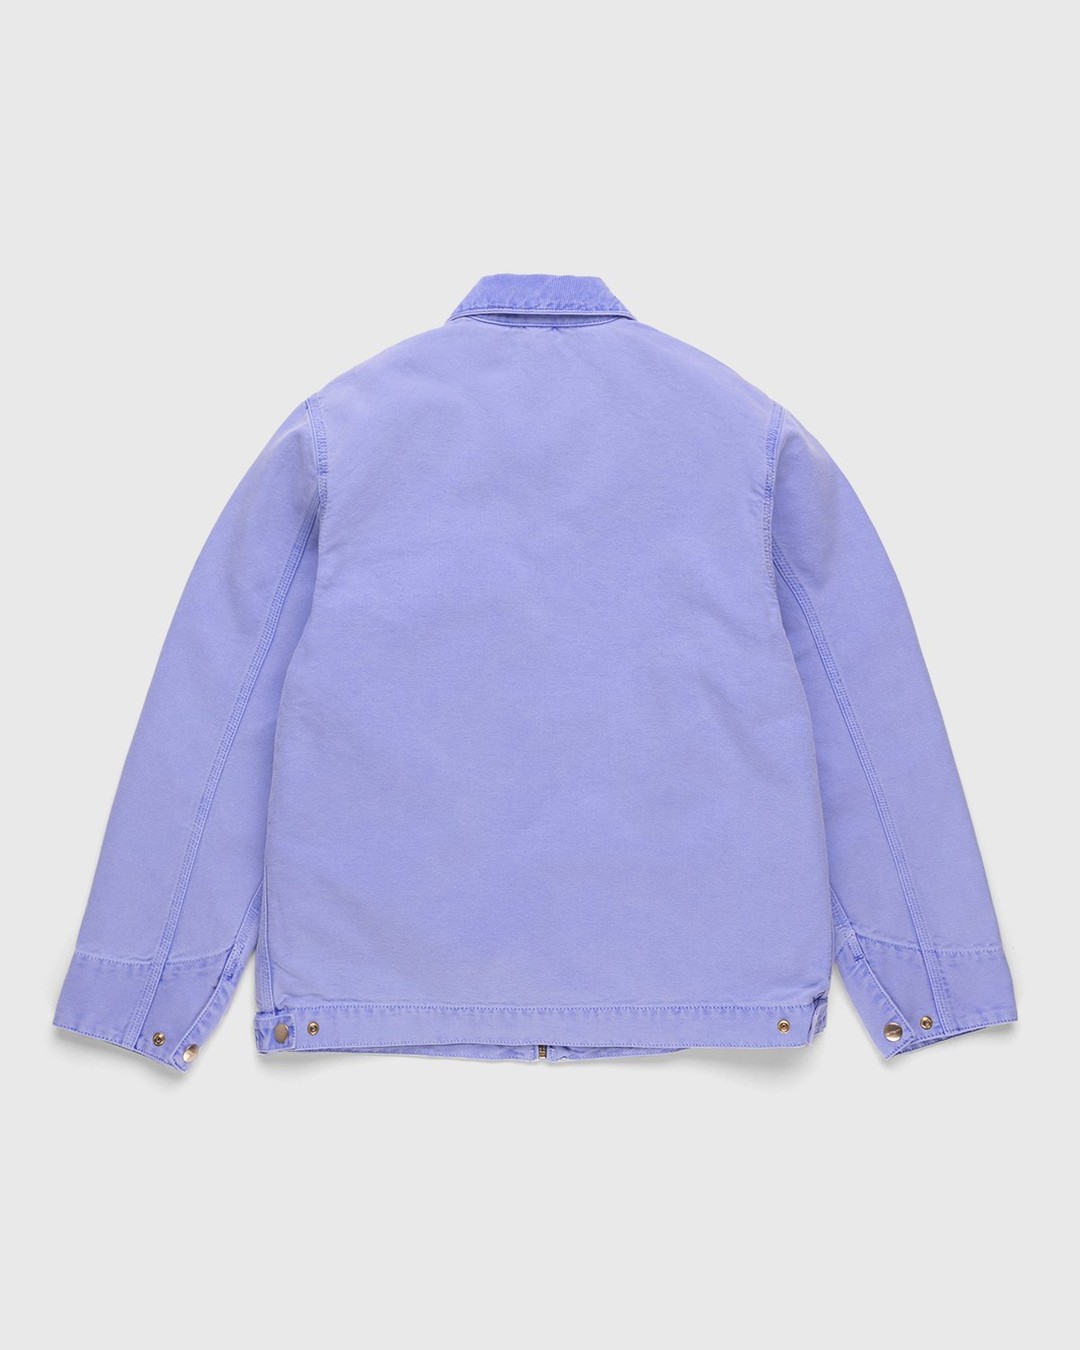 Carhartt WIP – Detroit Jacket Icy Water Faded - Outerwear - Blue - Image 2